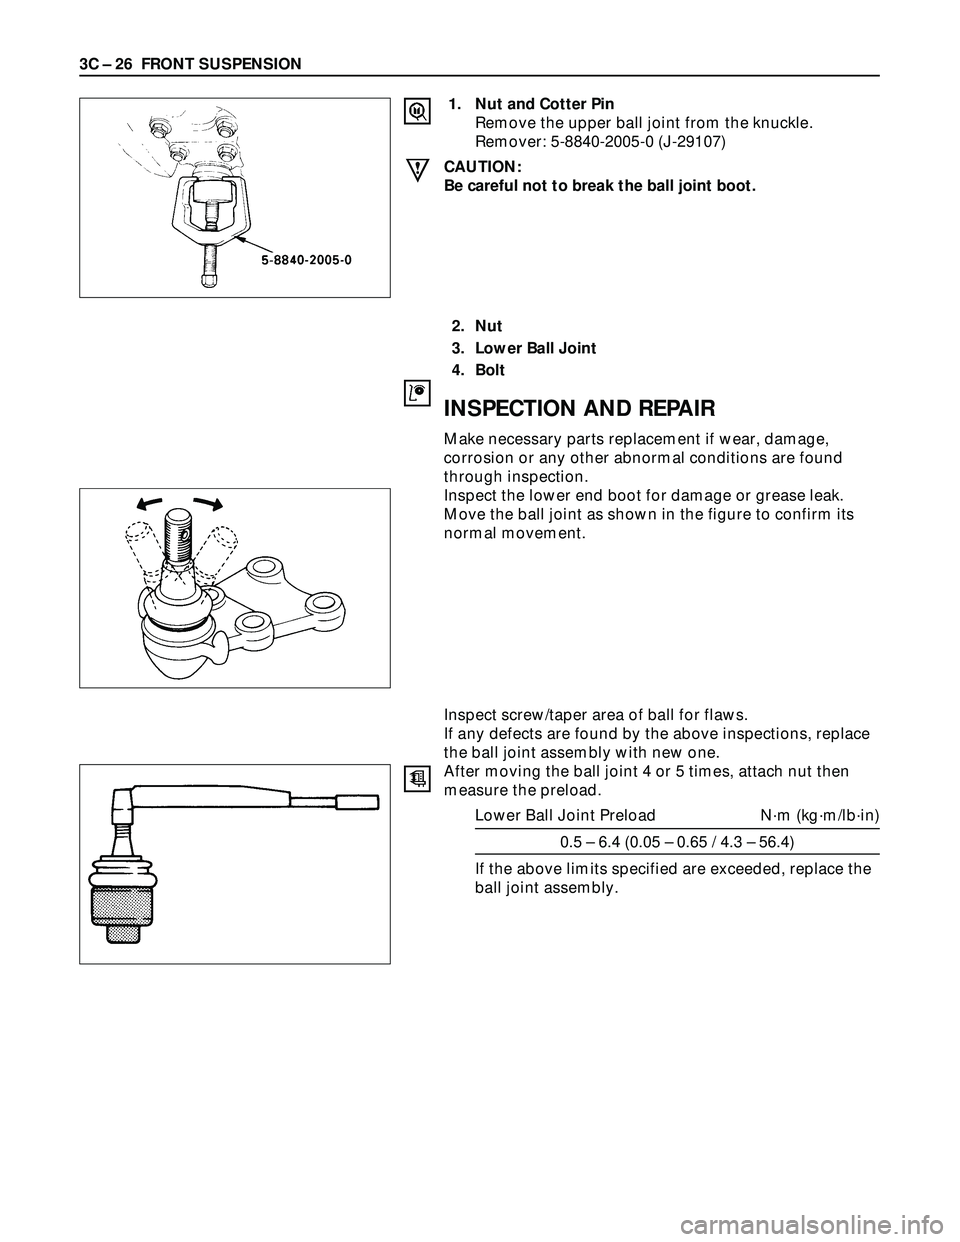 ISUZU TROOPER 1998  Service User Guide 3C – 26 FRONT SUSPENSION
1. Nut and Cotter Pin
Remove the upper ball joint from the knuckle.
Remover: 5-8840-2005-0 (J-29107)
CAUTION:
Be careful not to break the ball joint boot.
2. Nut
3. Lower Ba